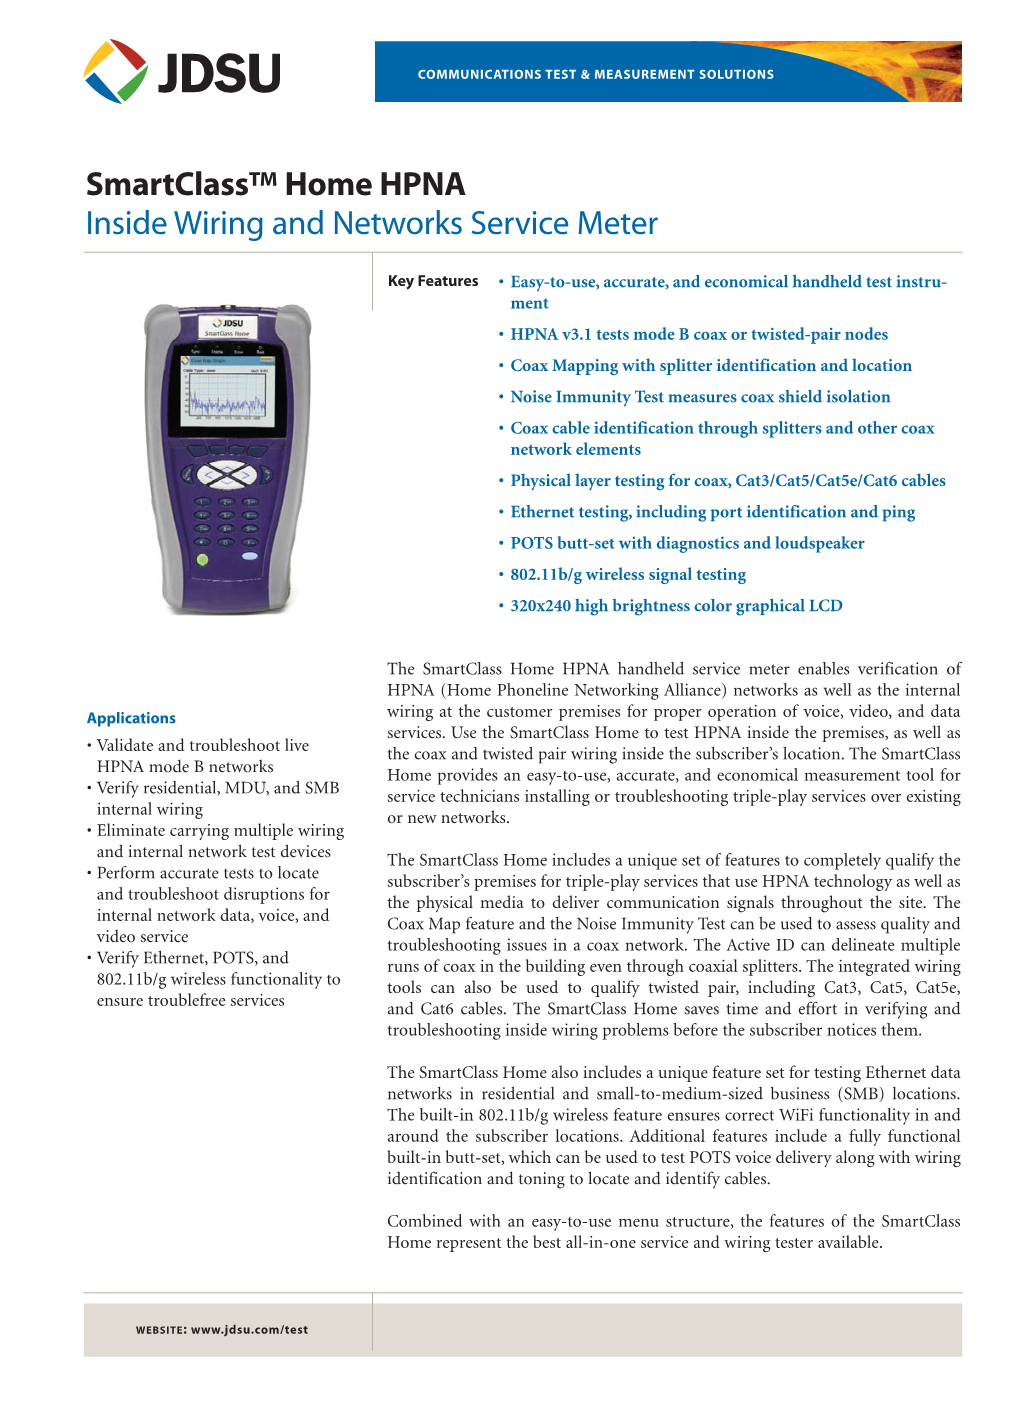 Smartclass™ Home HPNA Inside Wiring and Networks Service Meter